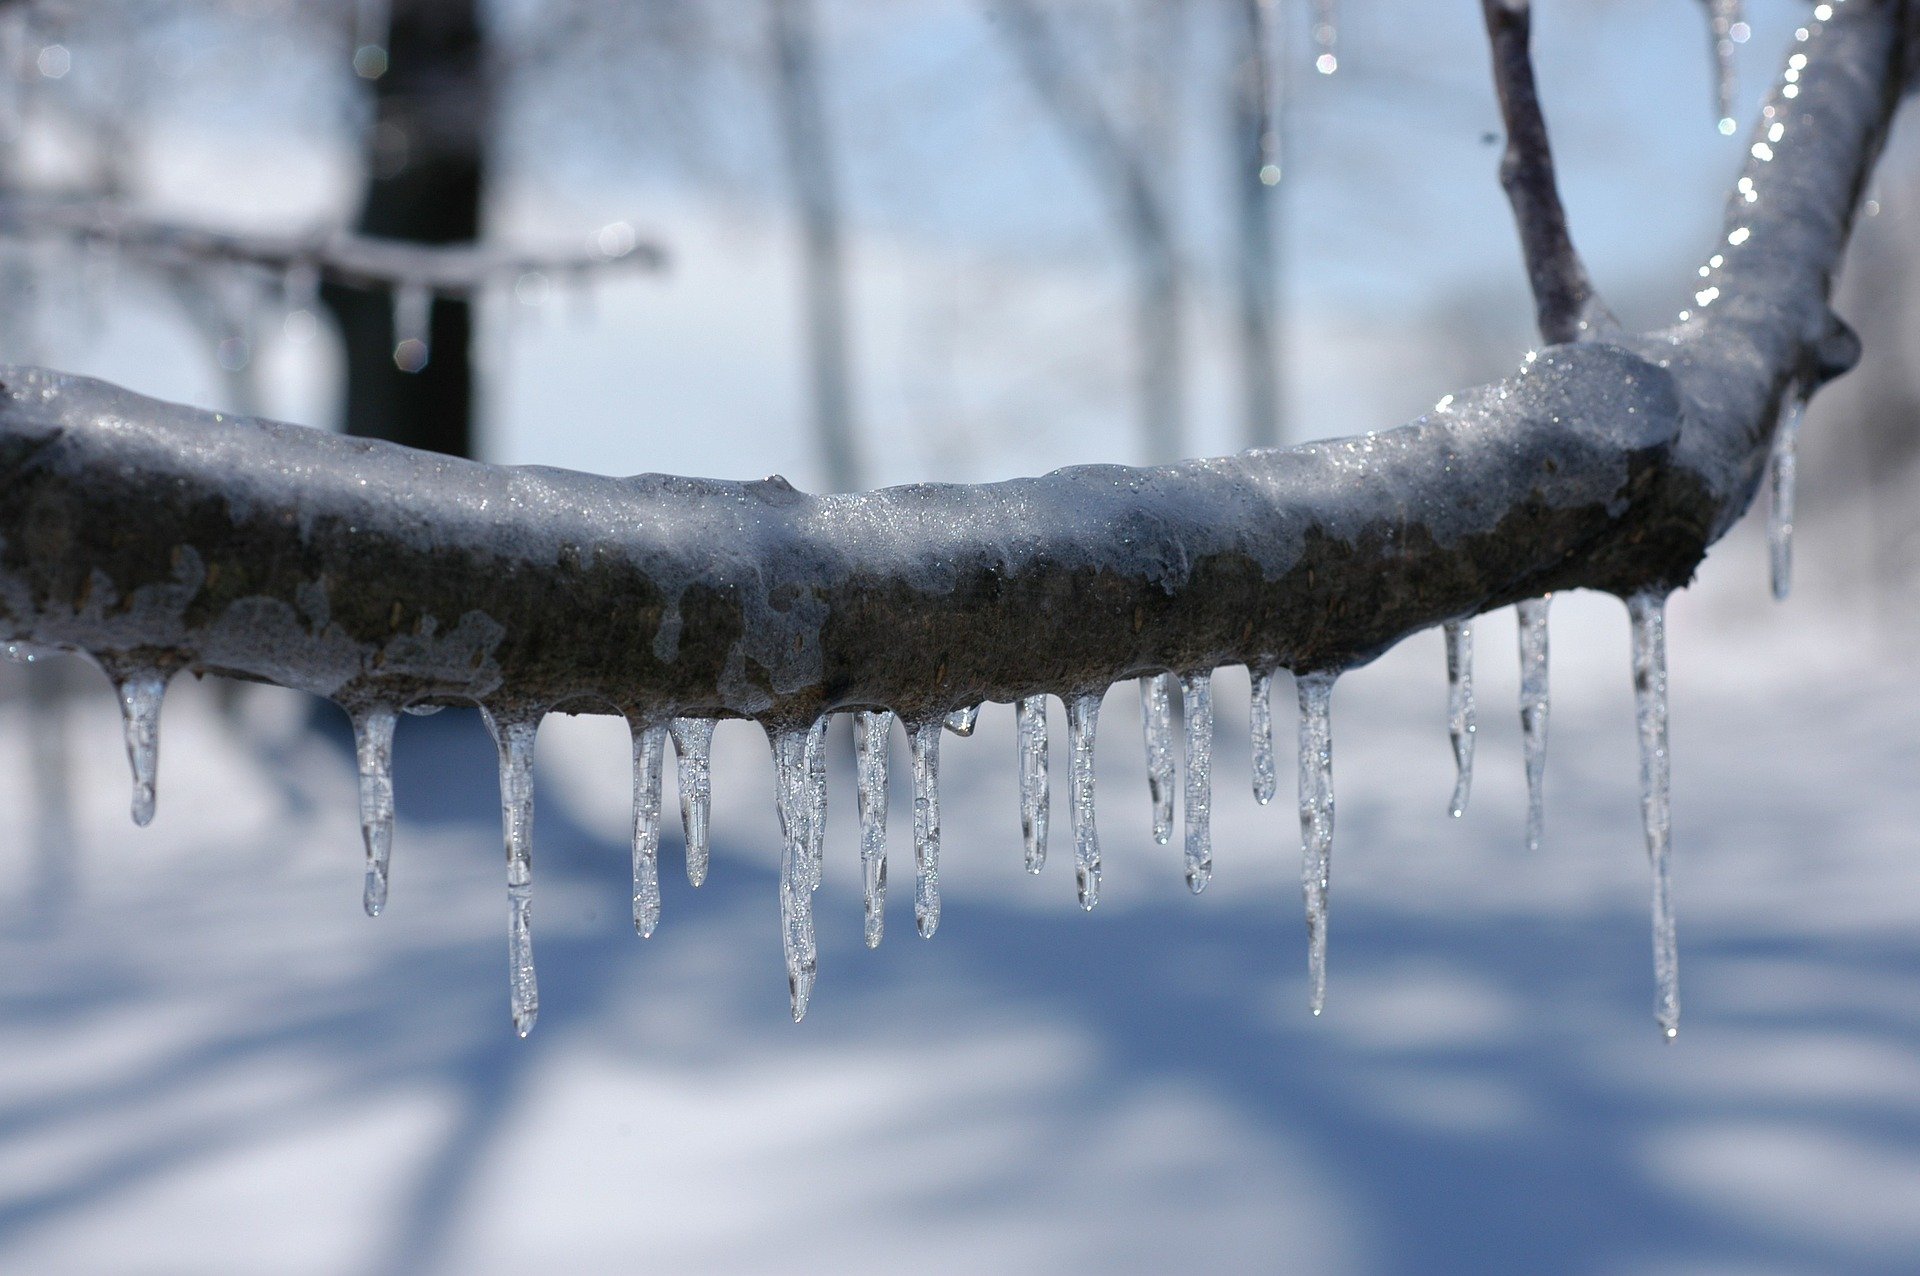 Ice on branch | Source: Pixabay